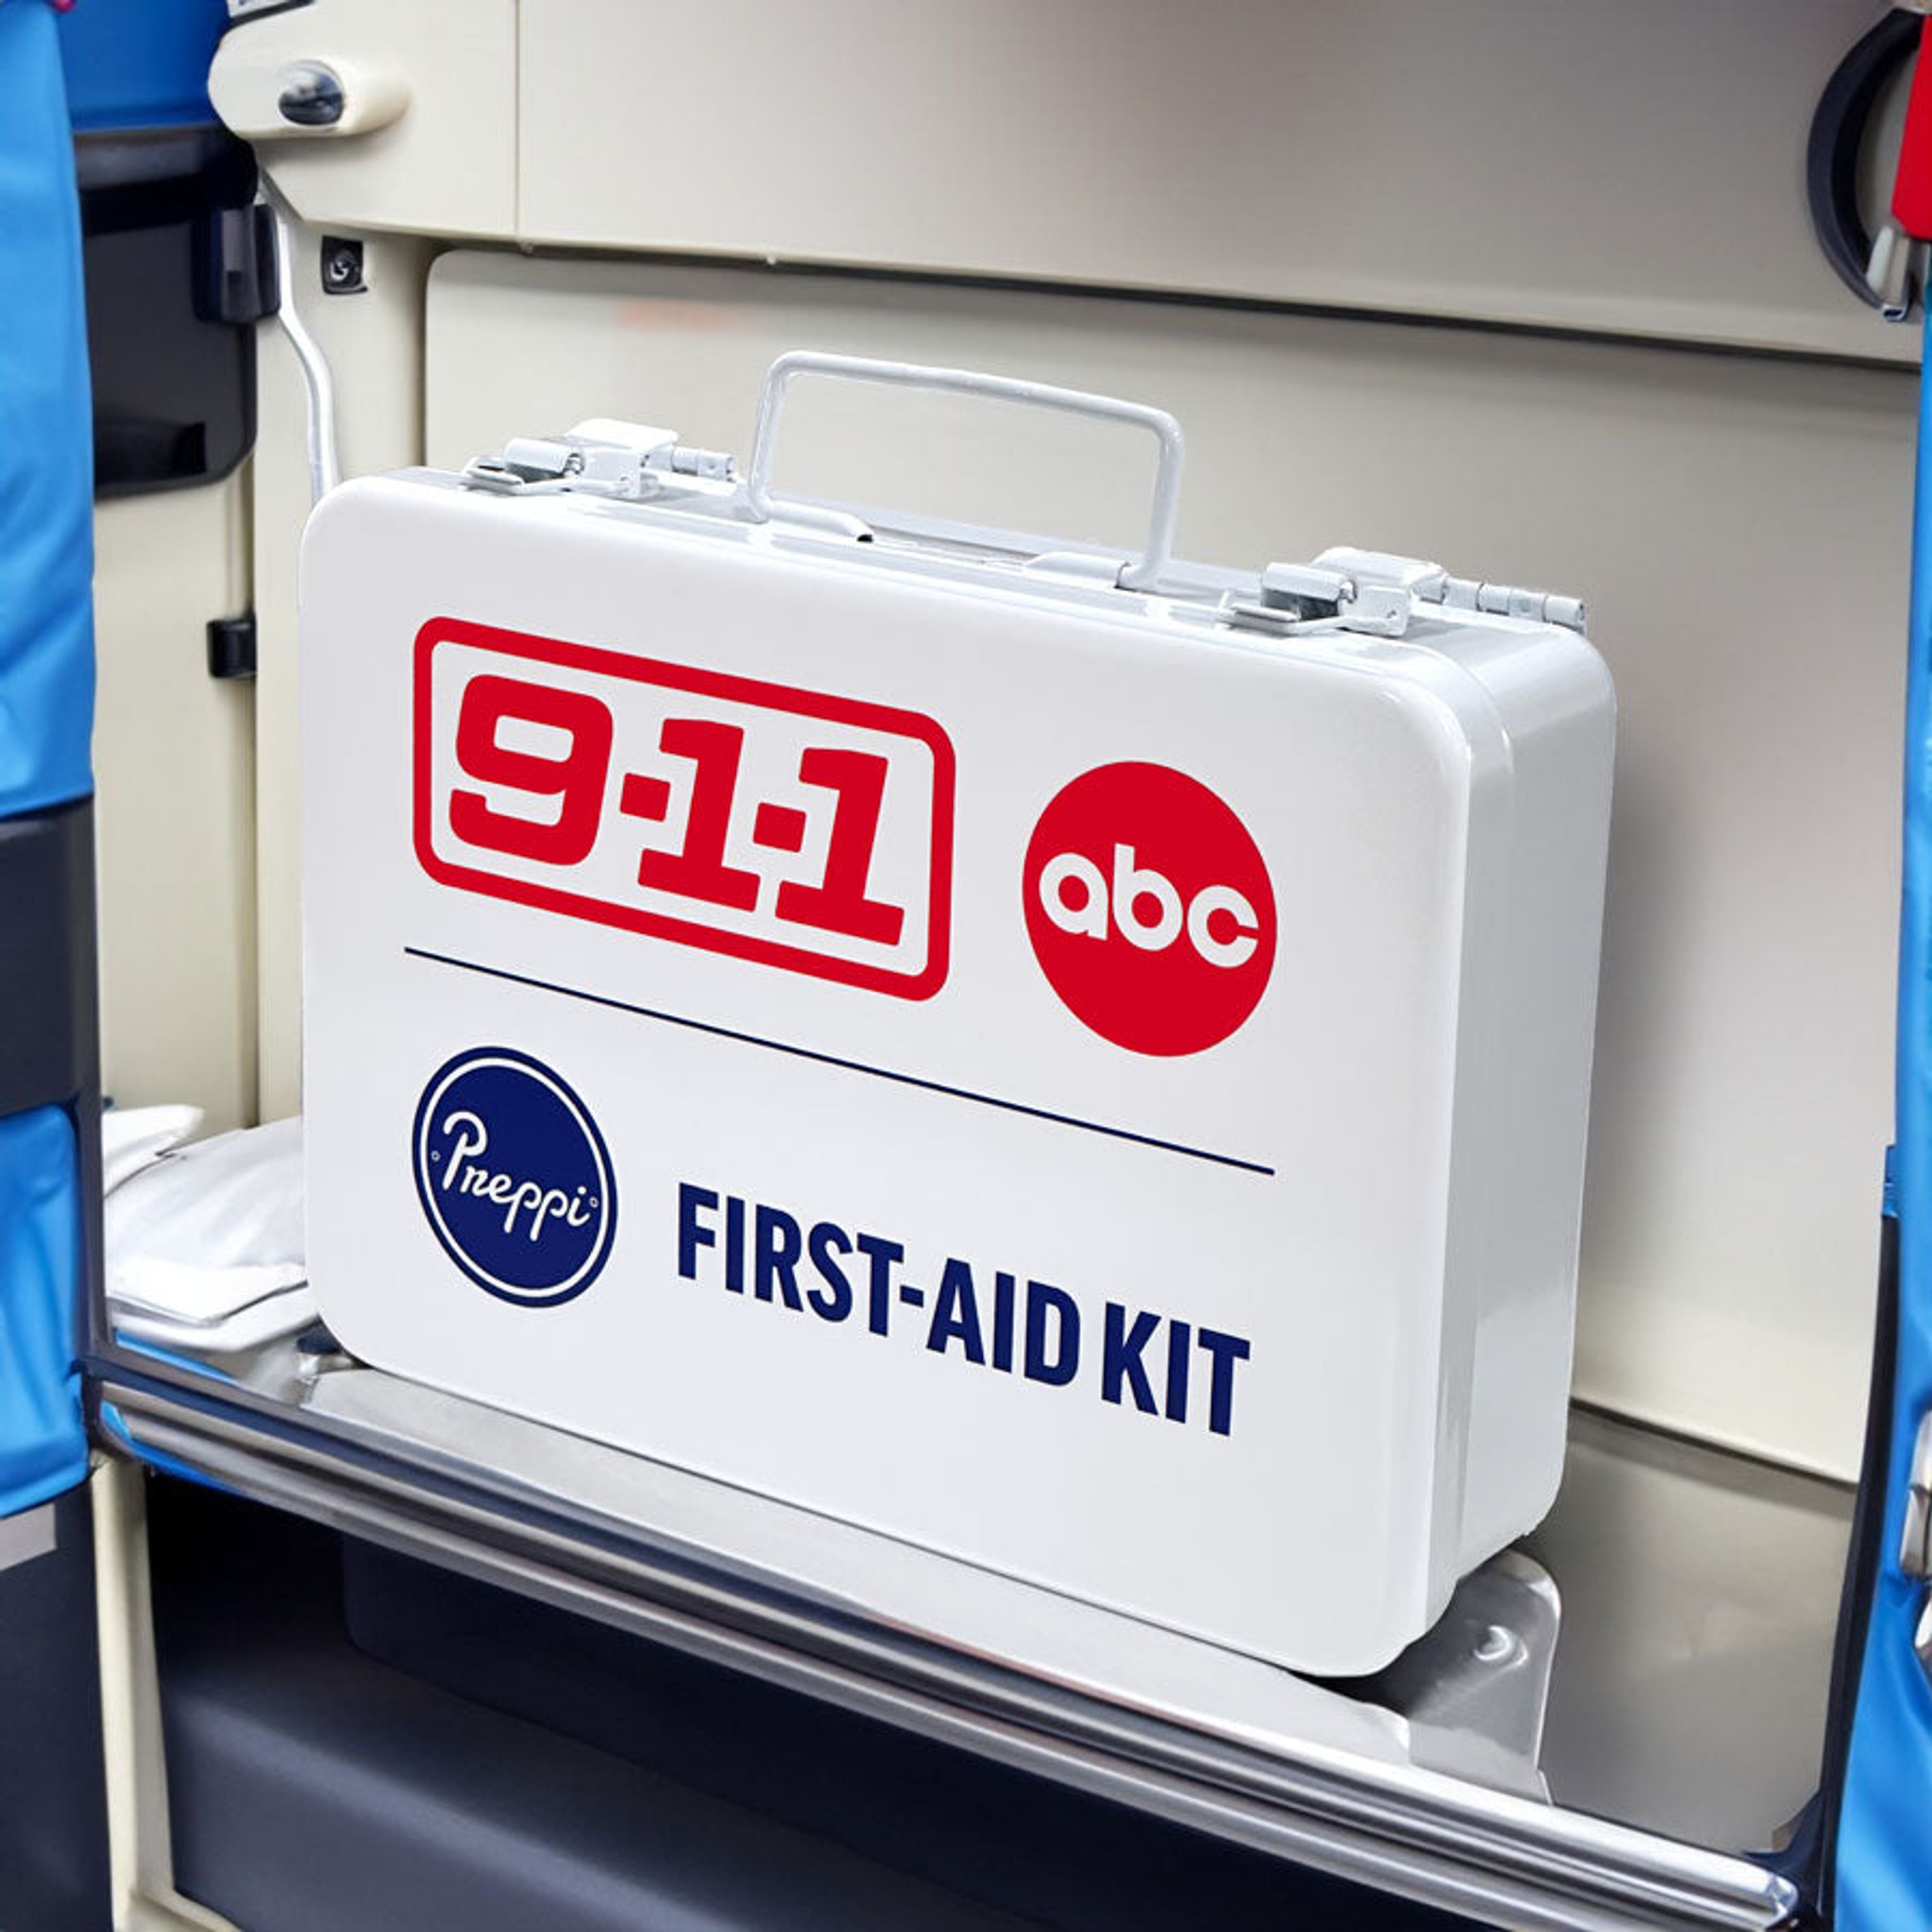 Preppi Limited Edition First-Aid Kit